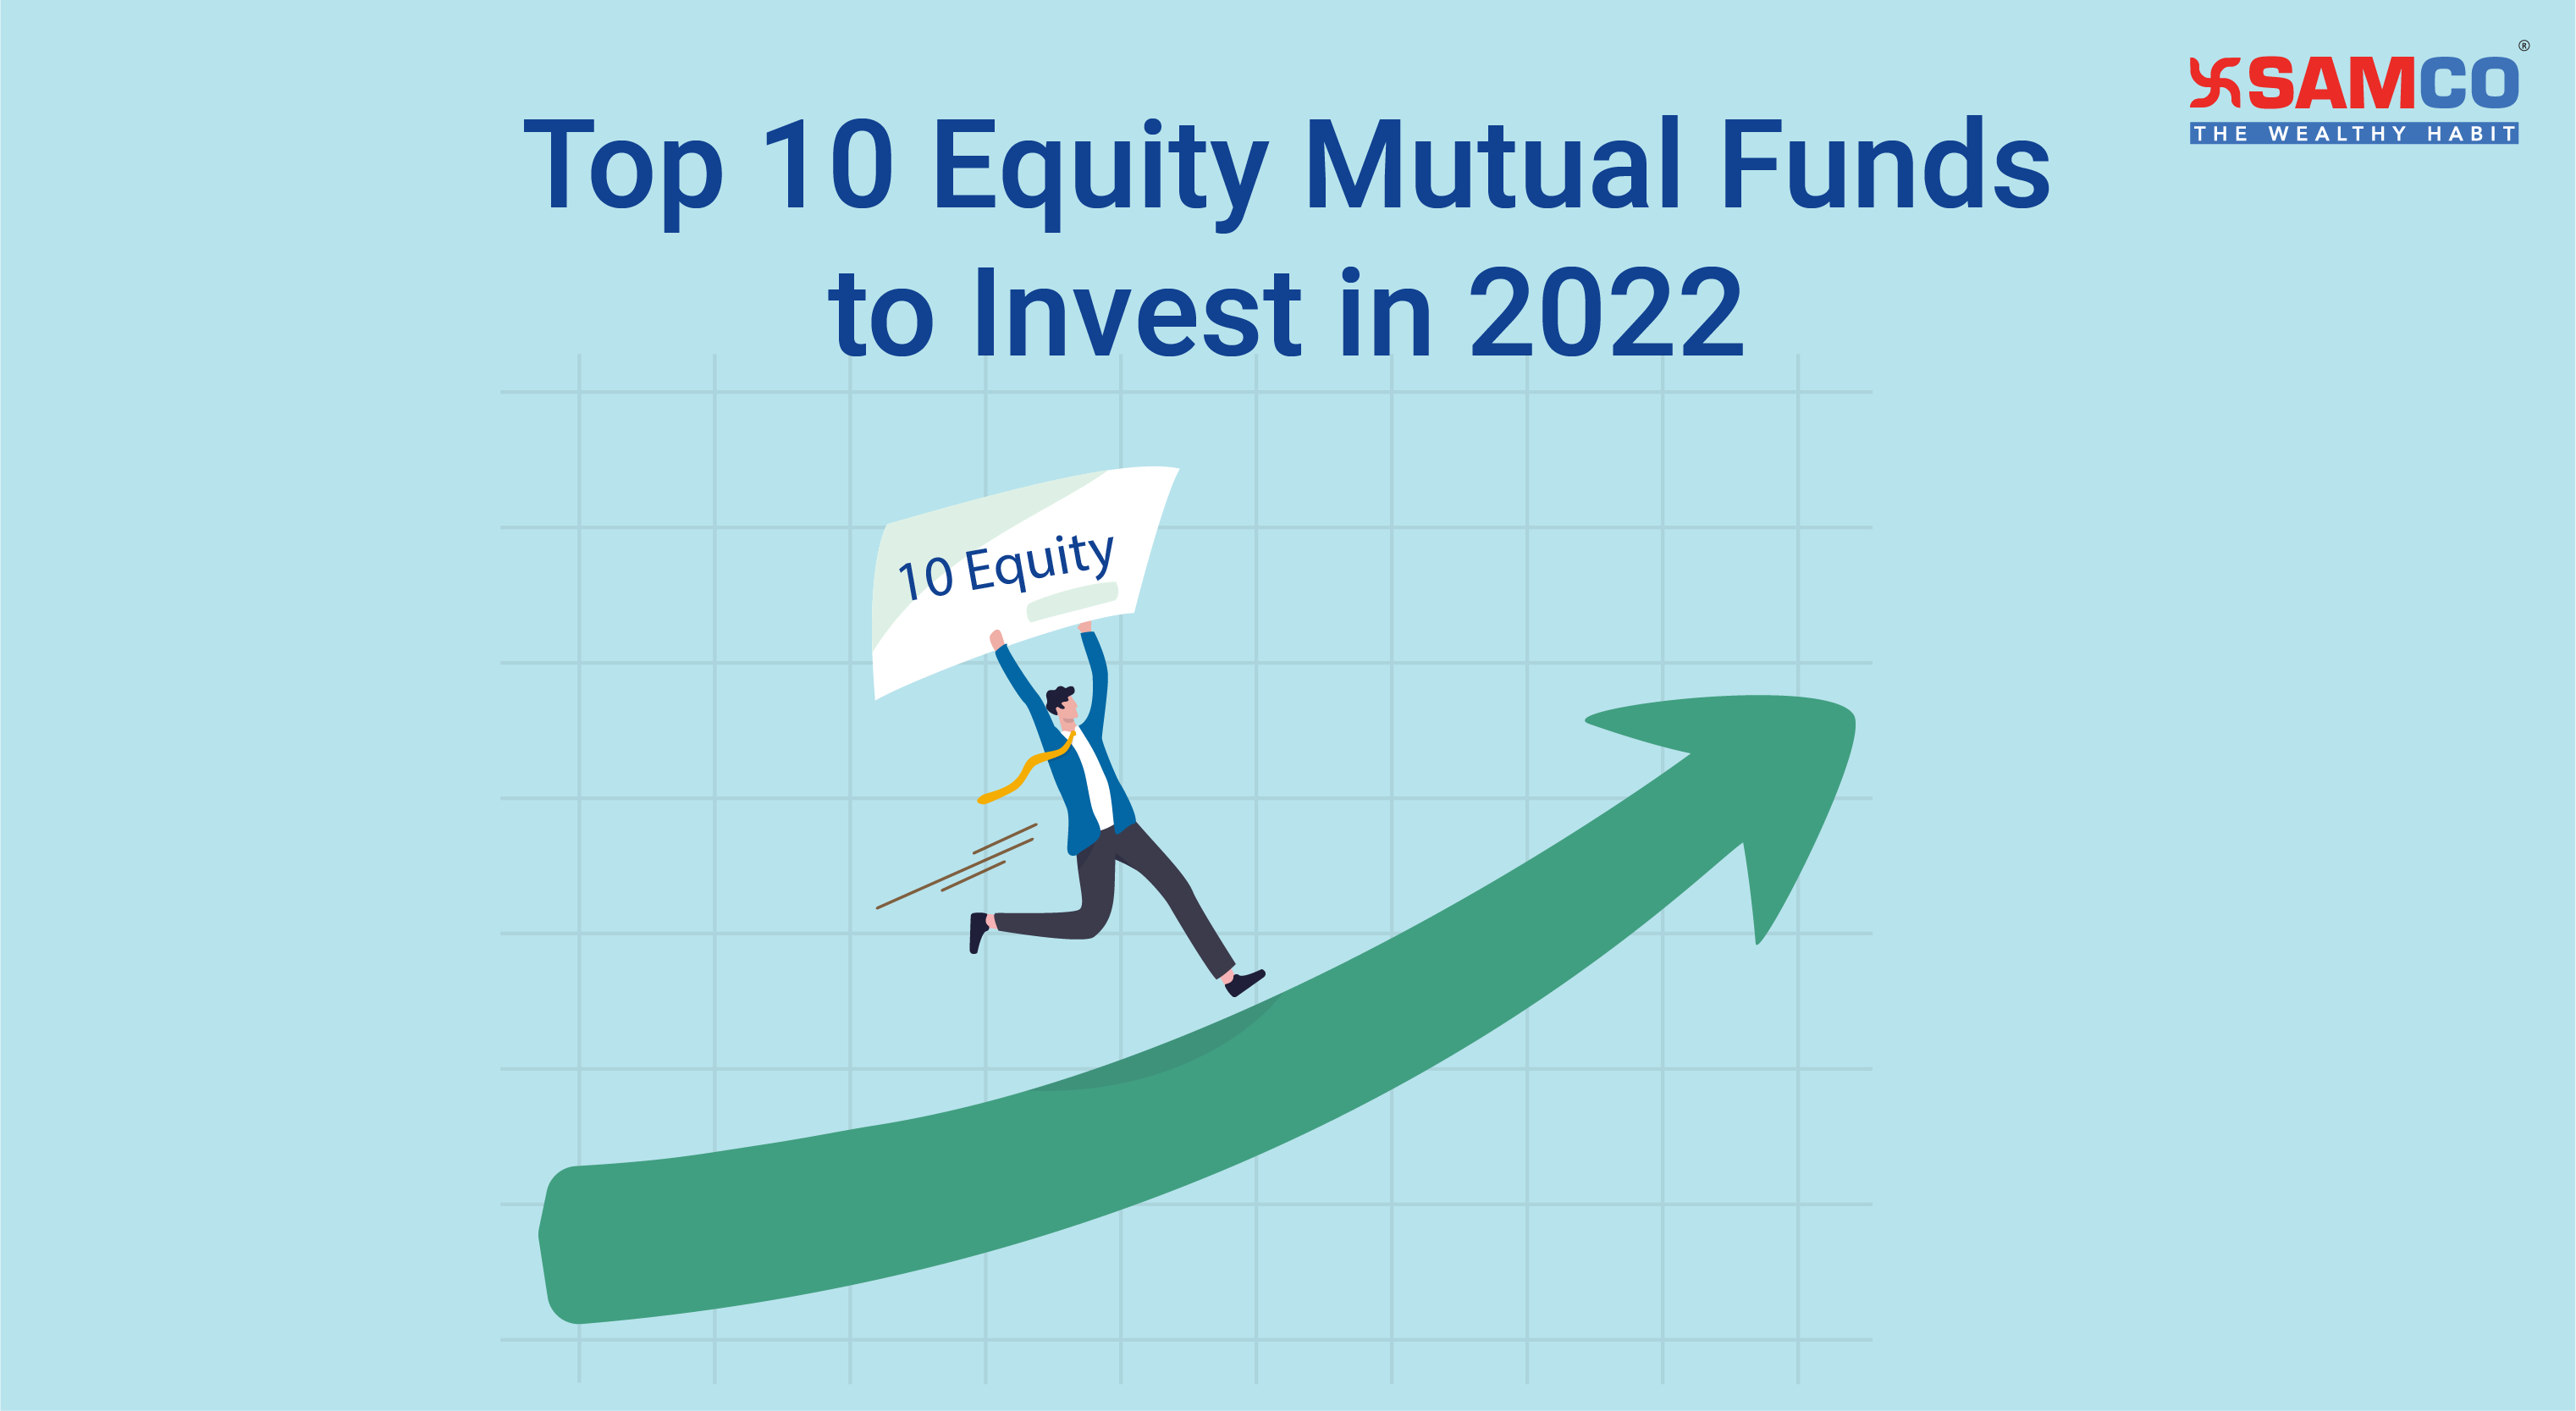 Top 10 Equity Mutual Funds to Invest in 2022